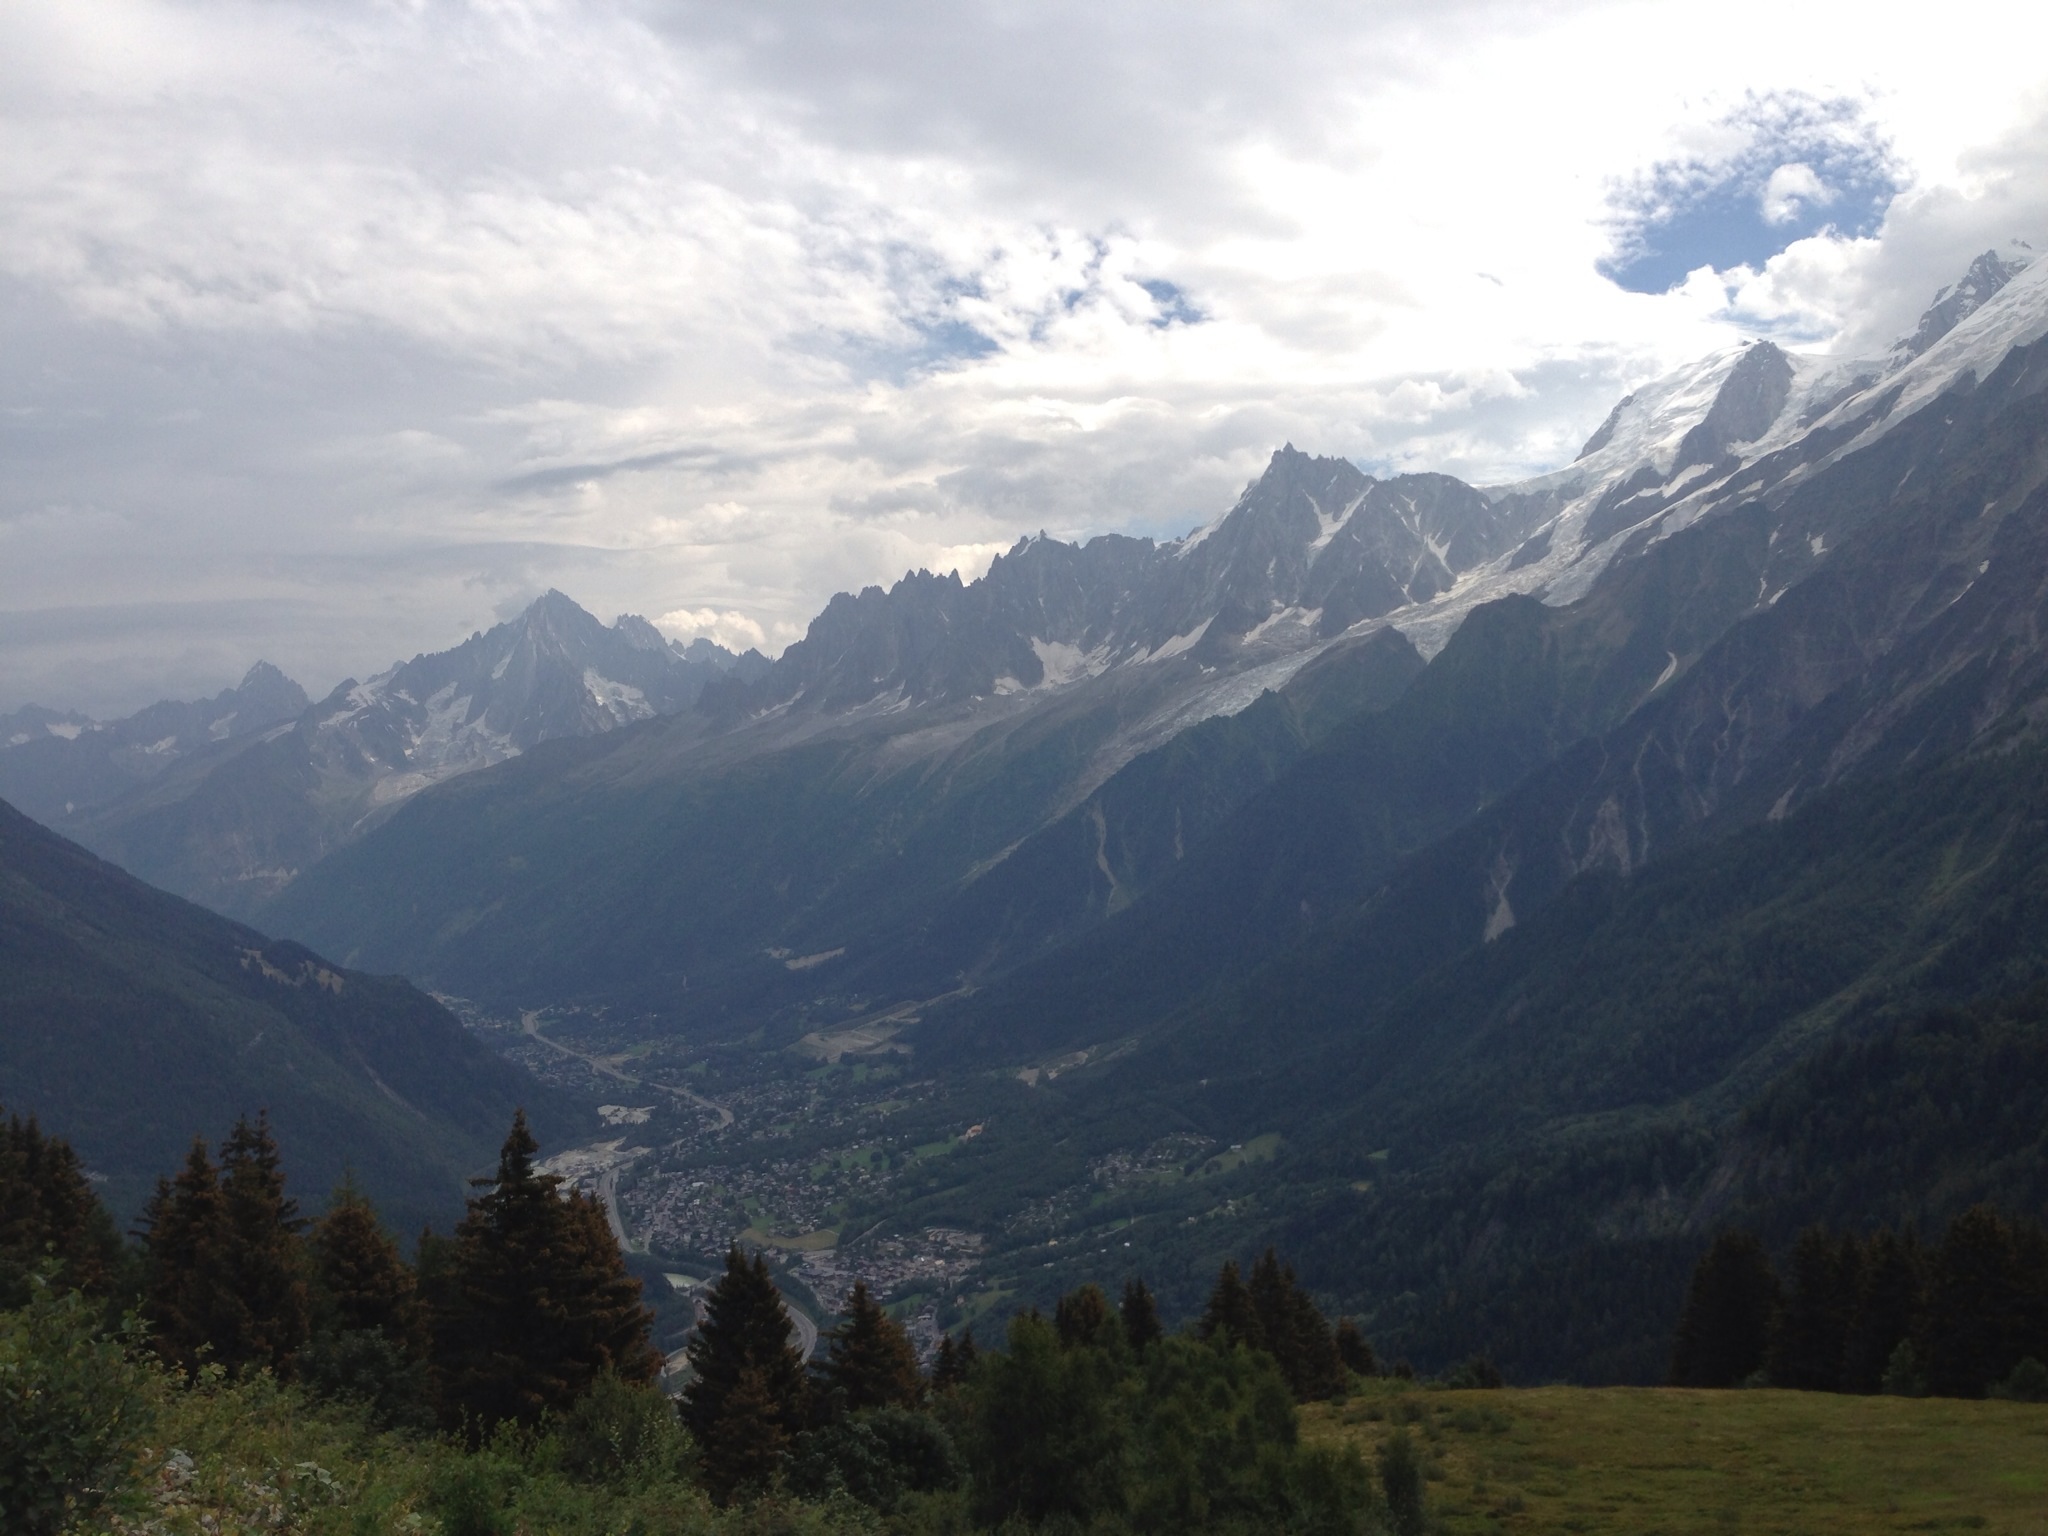 Looking back down the valley towards Chamonix